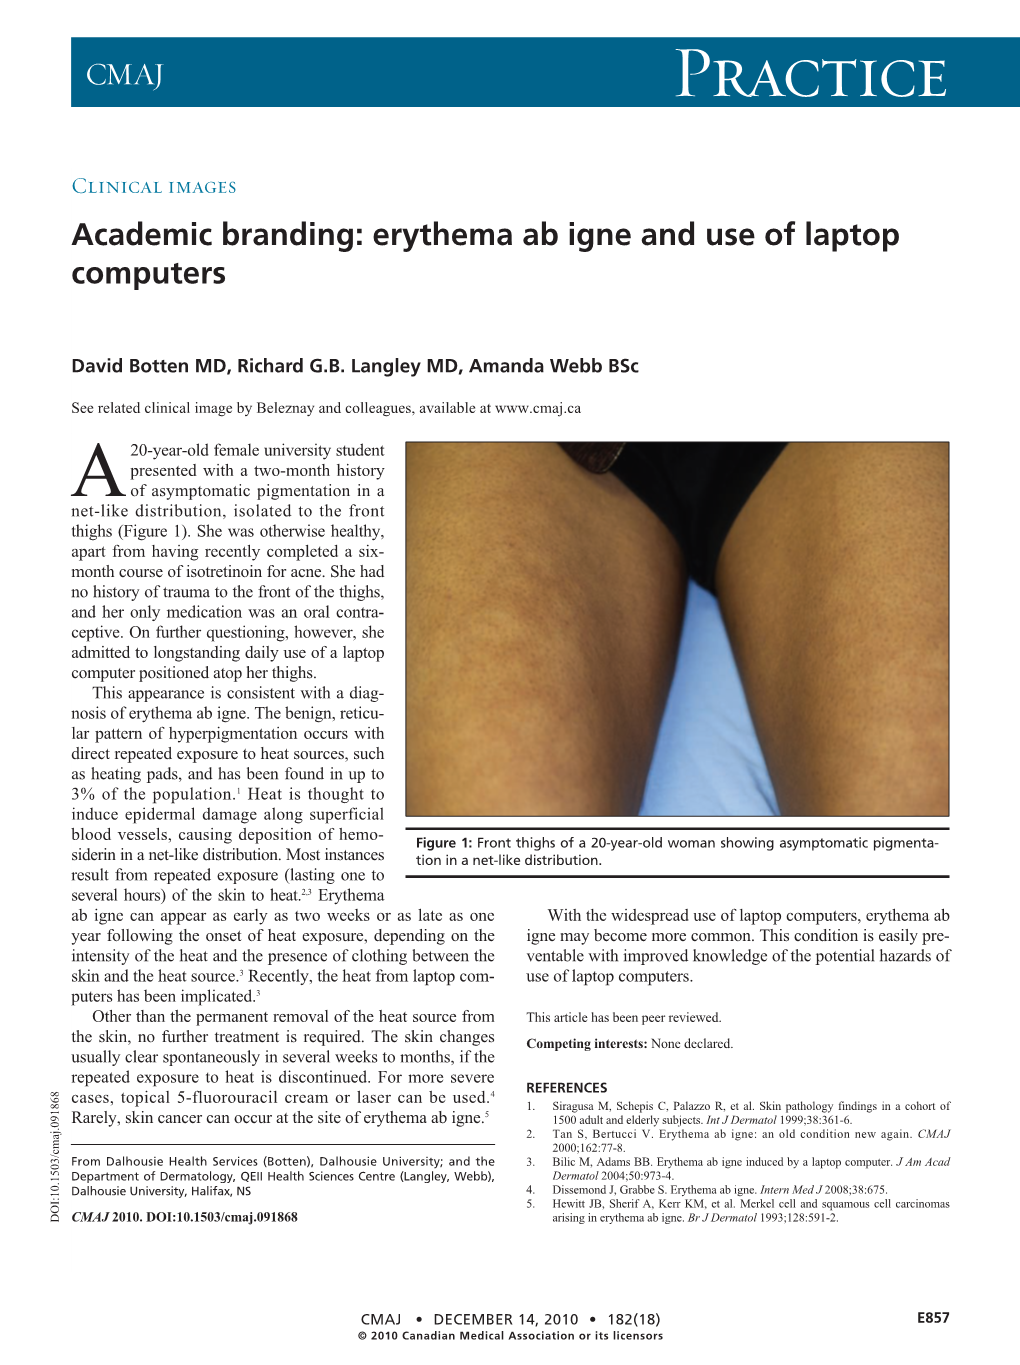 Erythema Ab Igne and Use of Laptop Computers